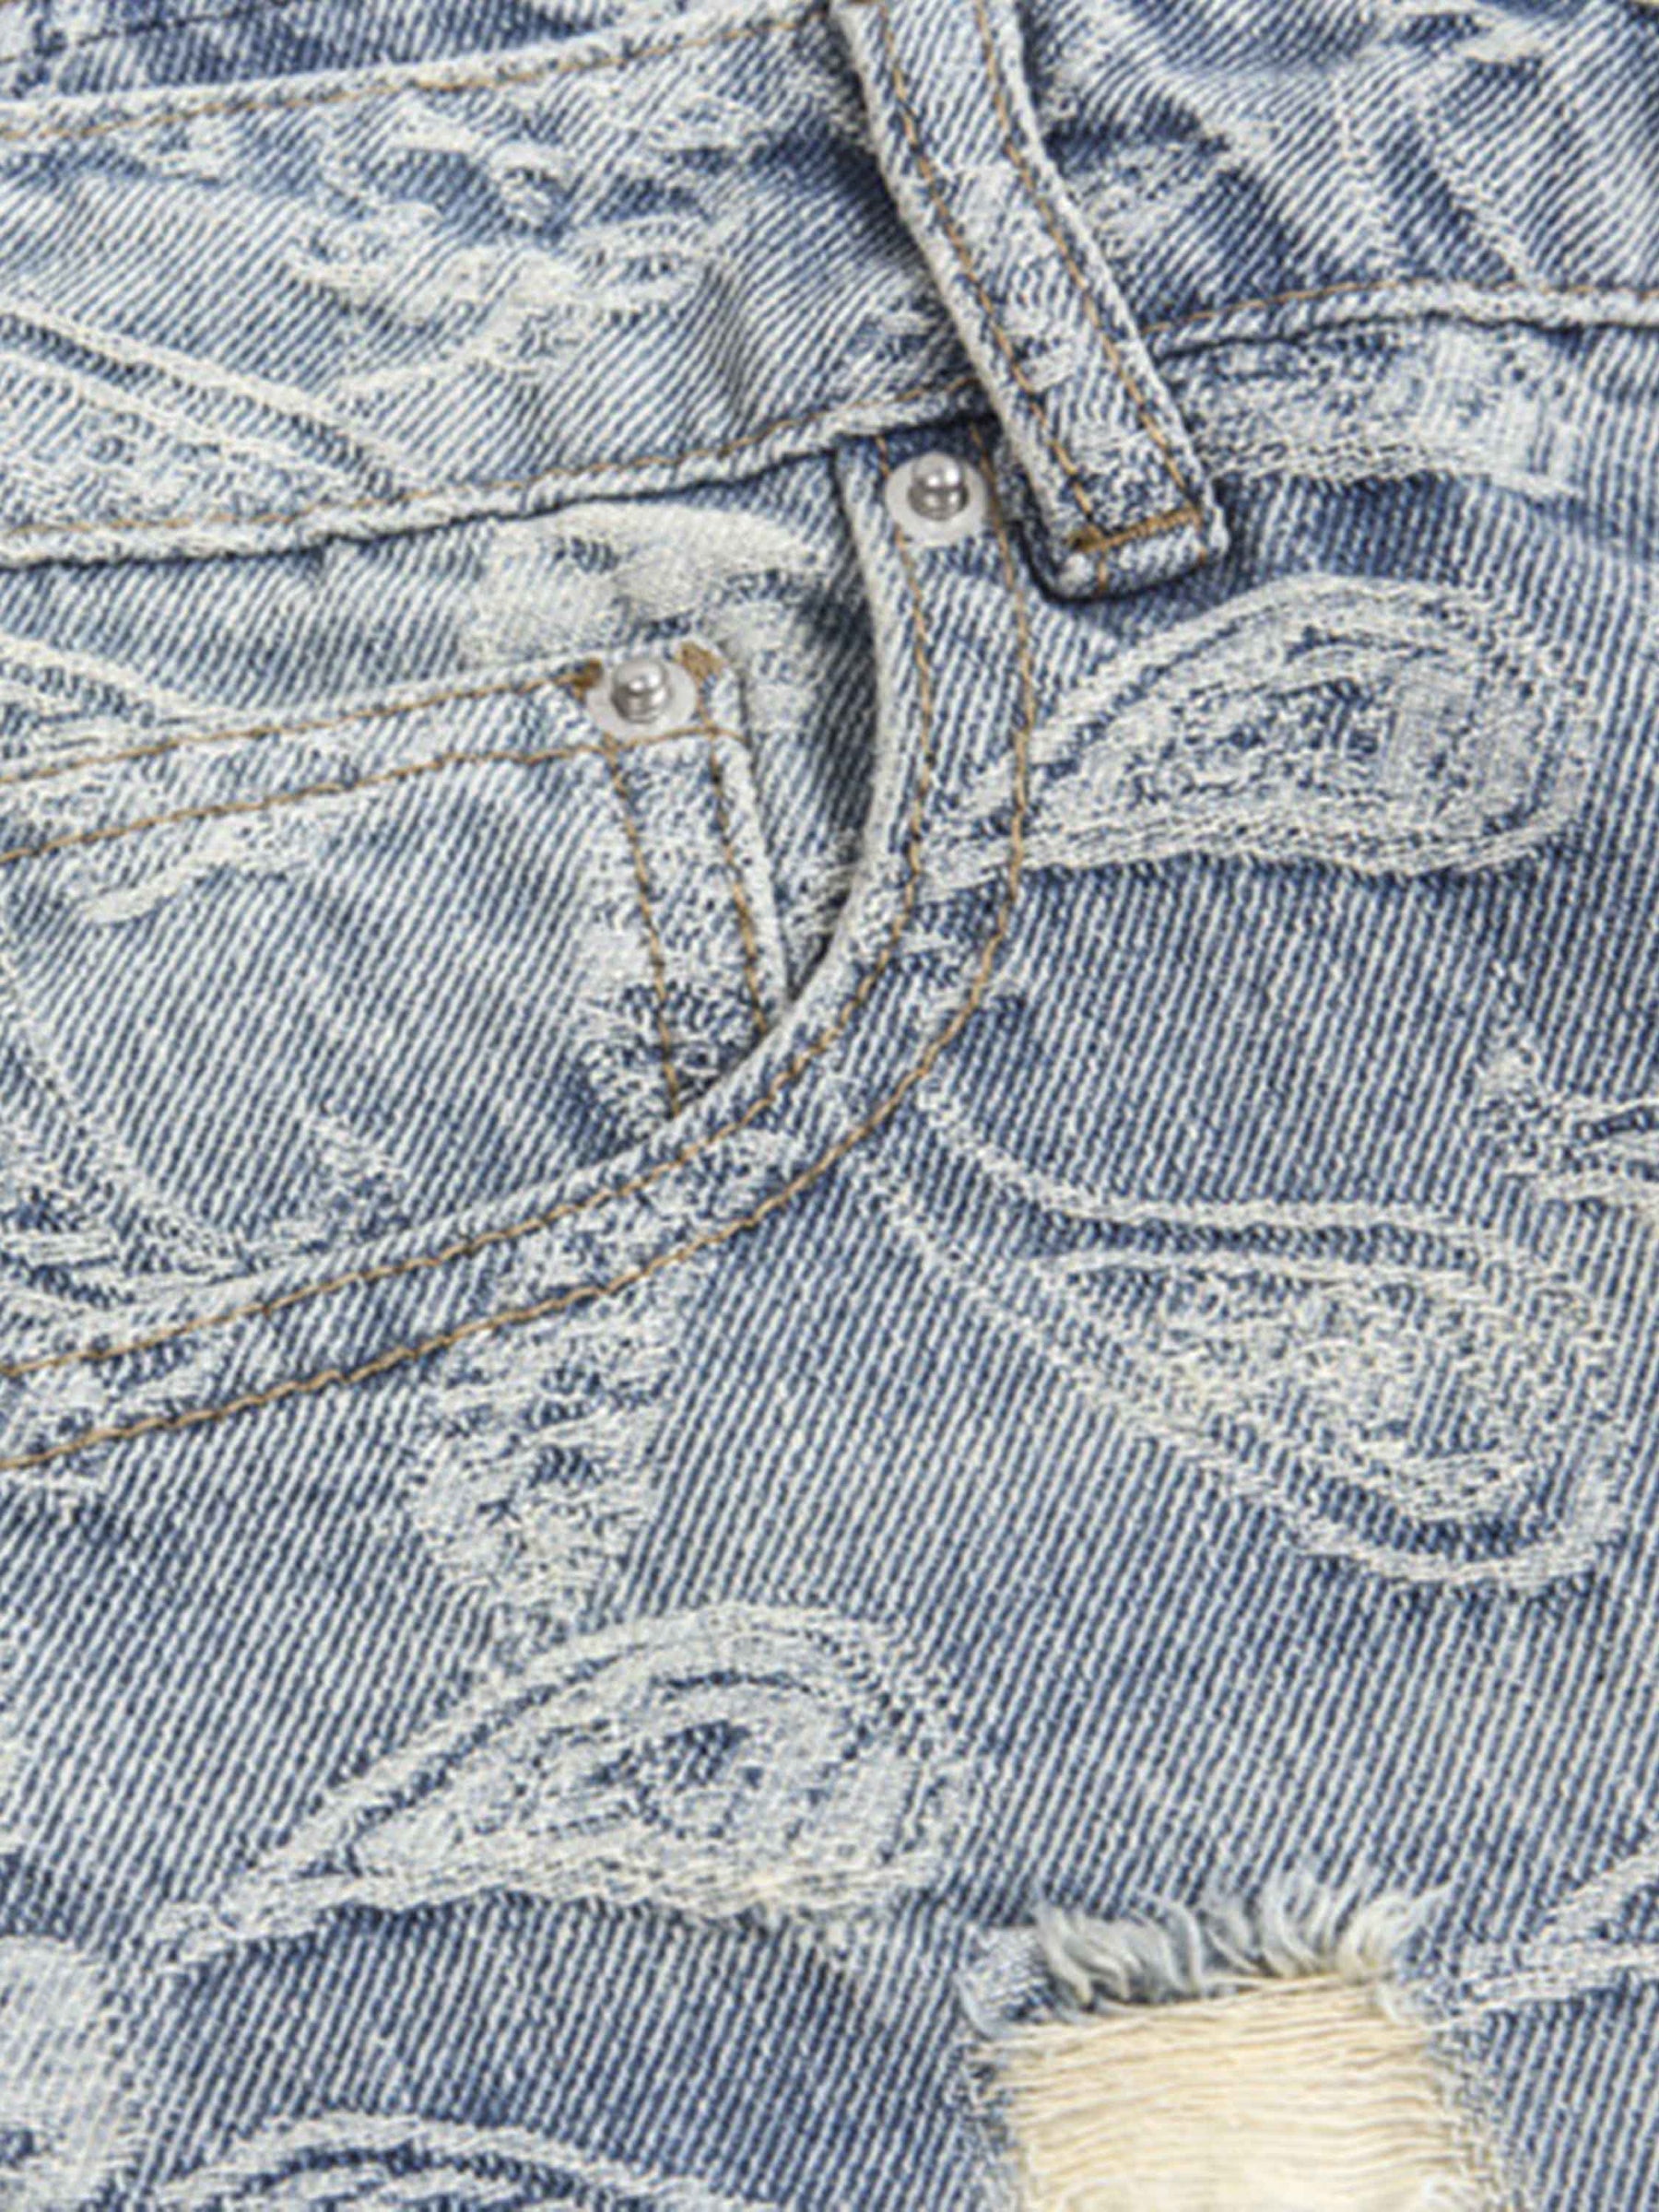 LUXENFY™ - American Street Vintage Heavy Cashew Flower Embroidered Jeans luxenfy.com